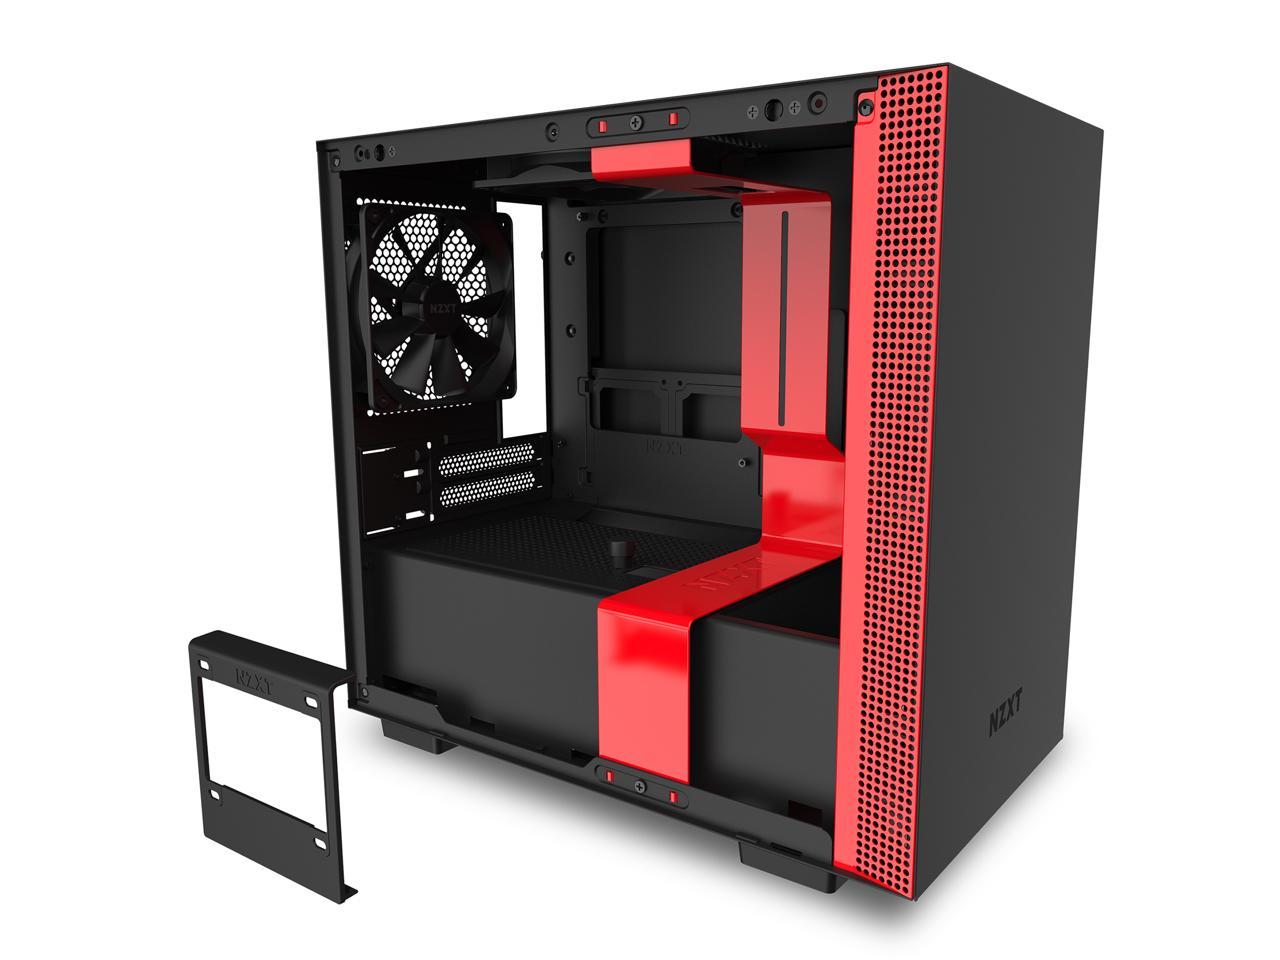 NZXT H210 - Mini-ITX PC Gaming Case - Front I/O USB Type-C Port - Tempered Glass Side Panel - Cable Management System - Water-Cooling Ready - Radiator Bracket - Steel Construction - Black/Red